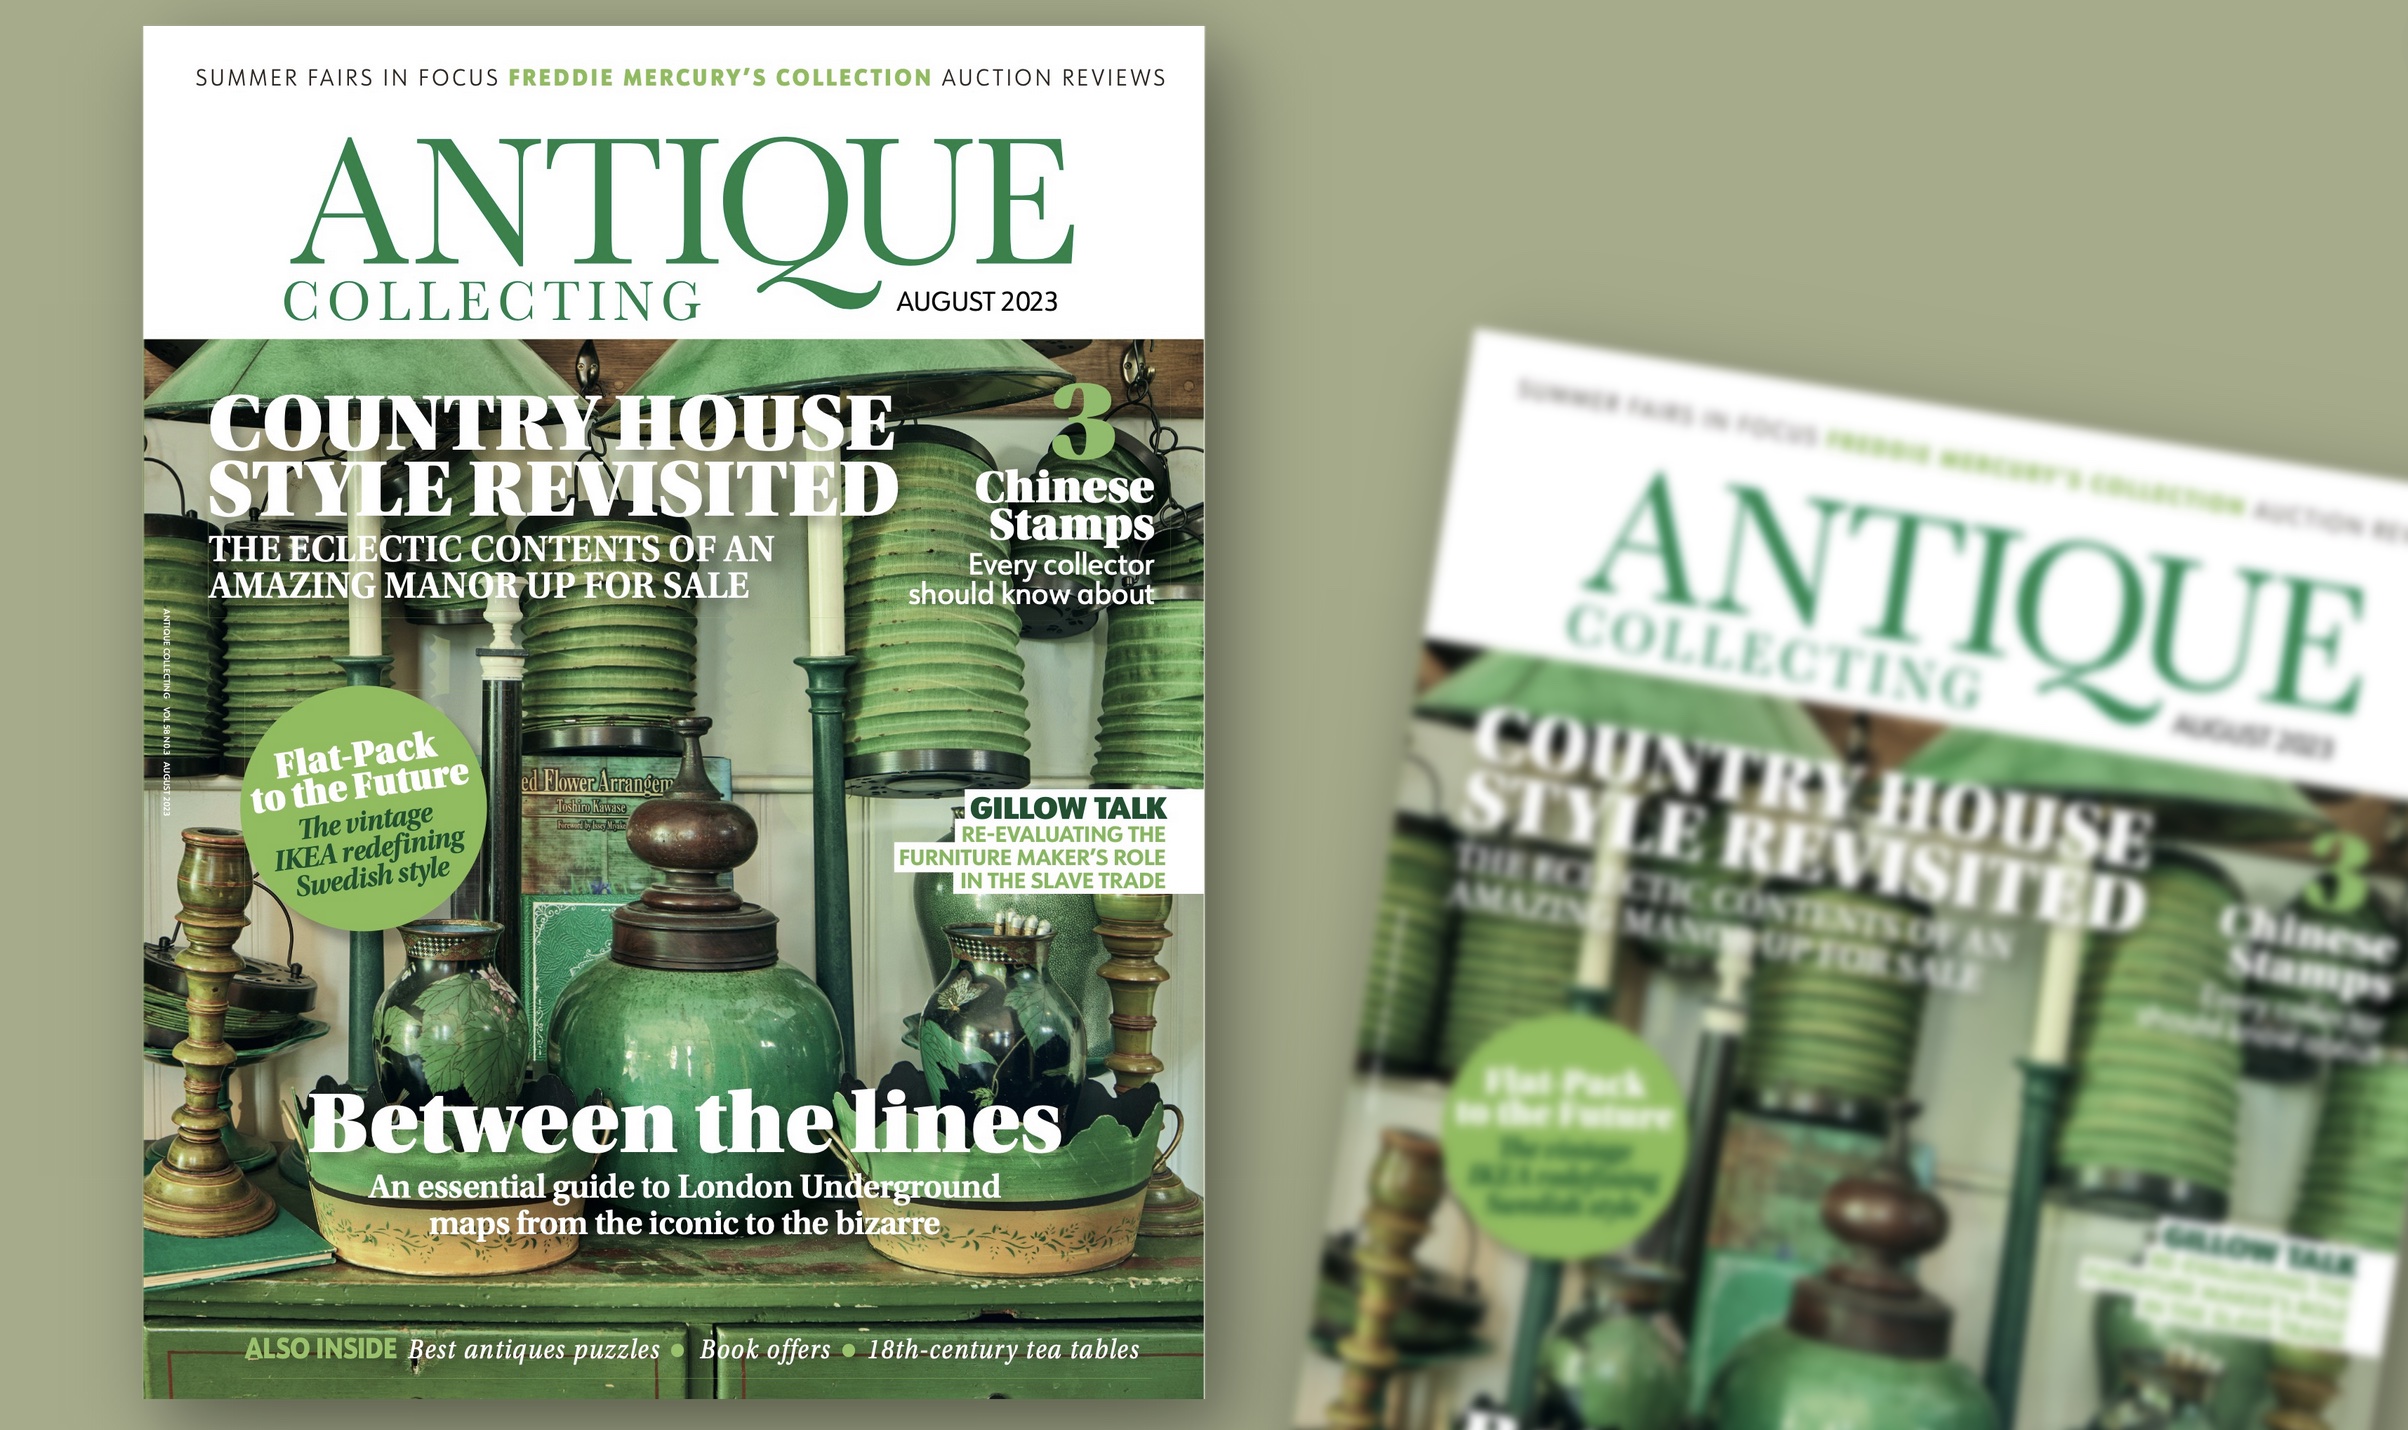 See inside August issue of Antique Collecting magazine – Antique Collecting